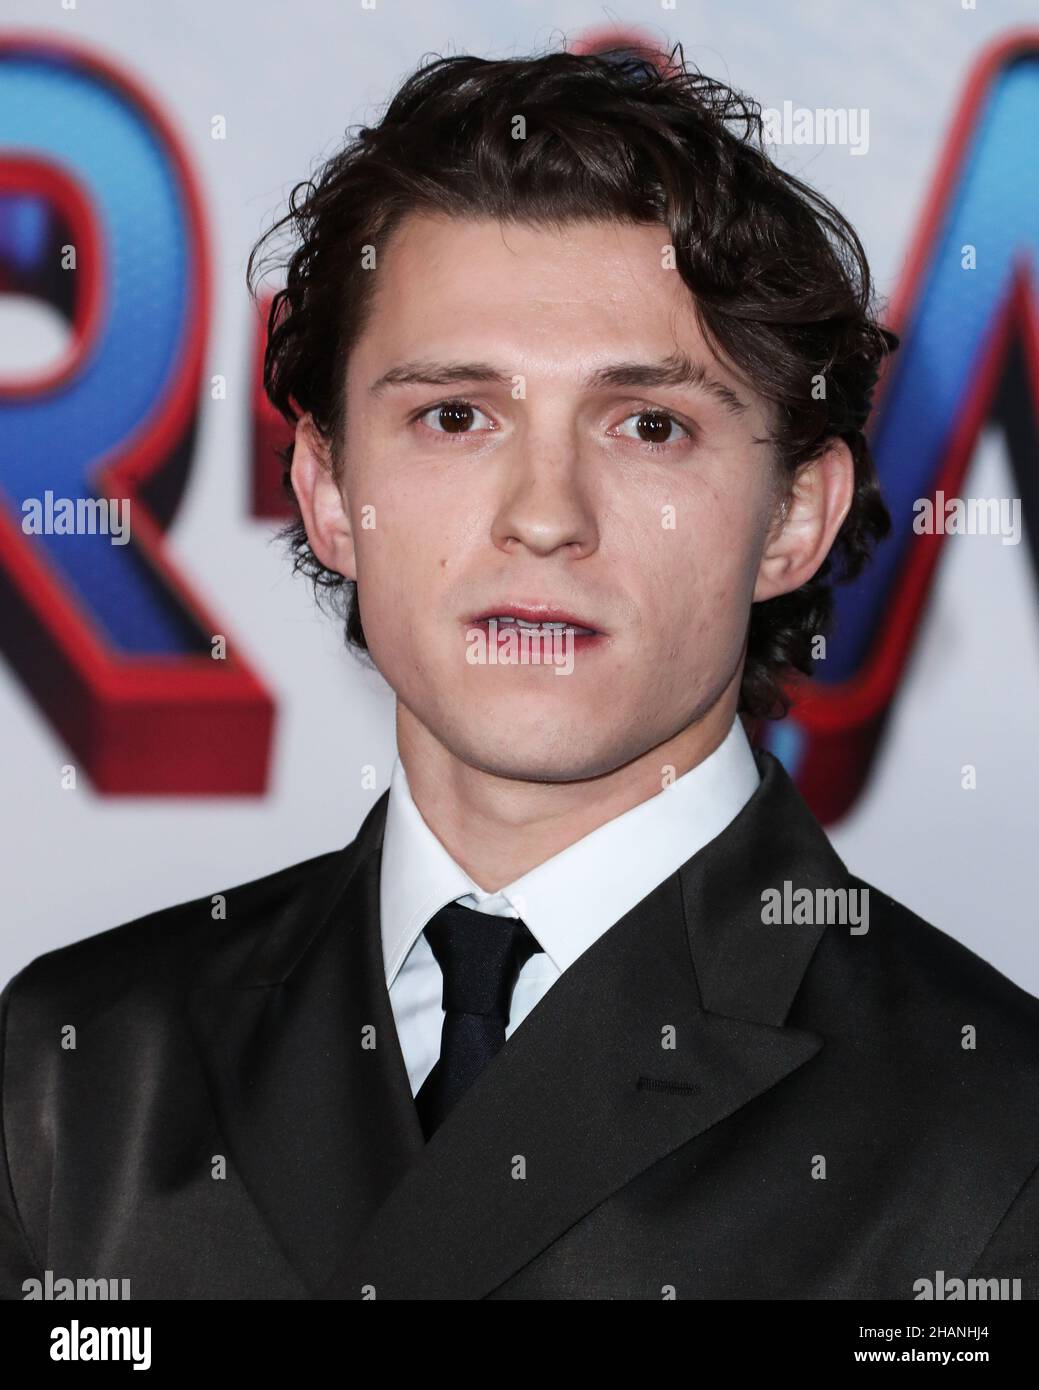 Westwood, United States. 13th Dec, 2021. WESTWOOD, LOS ANGELES, CALIFORNIA, USA - DECEMBER 13: Actor Tom Holland wearing a Prada suit and Christian Louboutin shoes arrives at the Los Angeles Premiere Of Columbia Pictures' 'Spider-Man: No Way Home' held at the Regency Village Theatre on December 13, 2021 in Westwood, Los Angeles, California, United States. (Photo by Xavier Collin/Image Press Agency/Sipa USA) Credit: Sipa USA/Alamy Live News Stock Photo